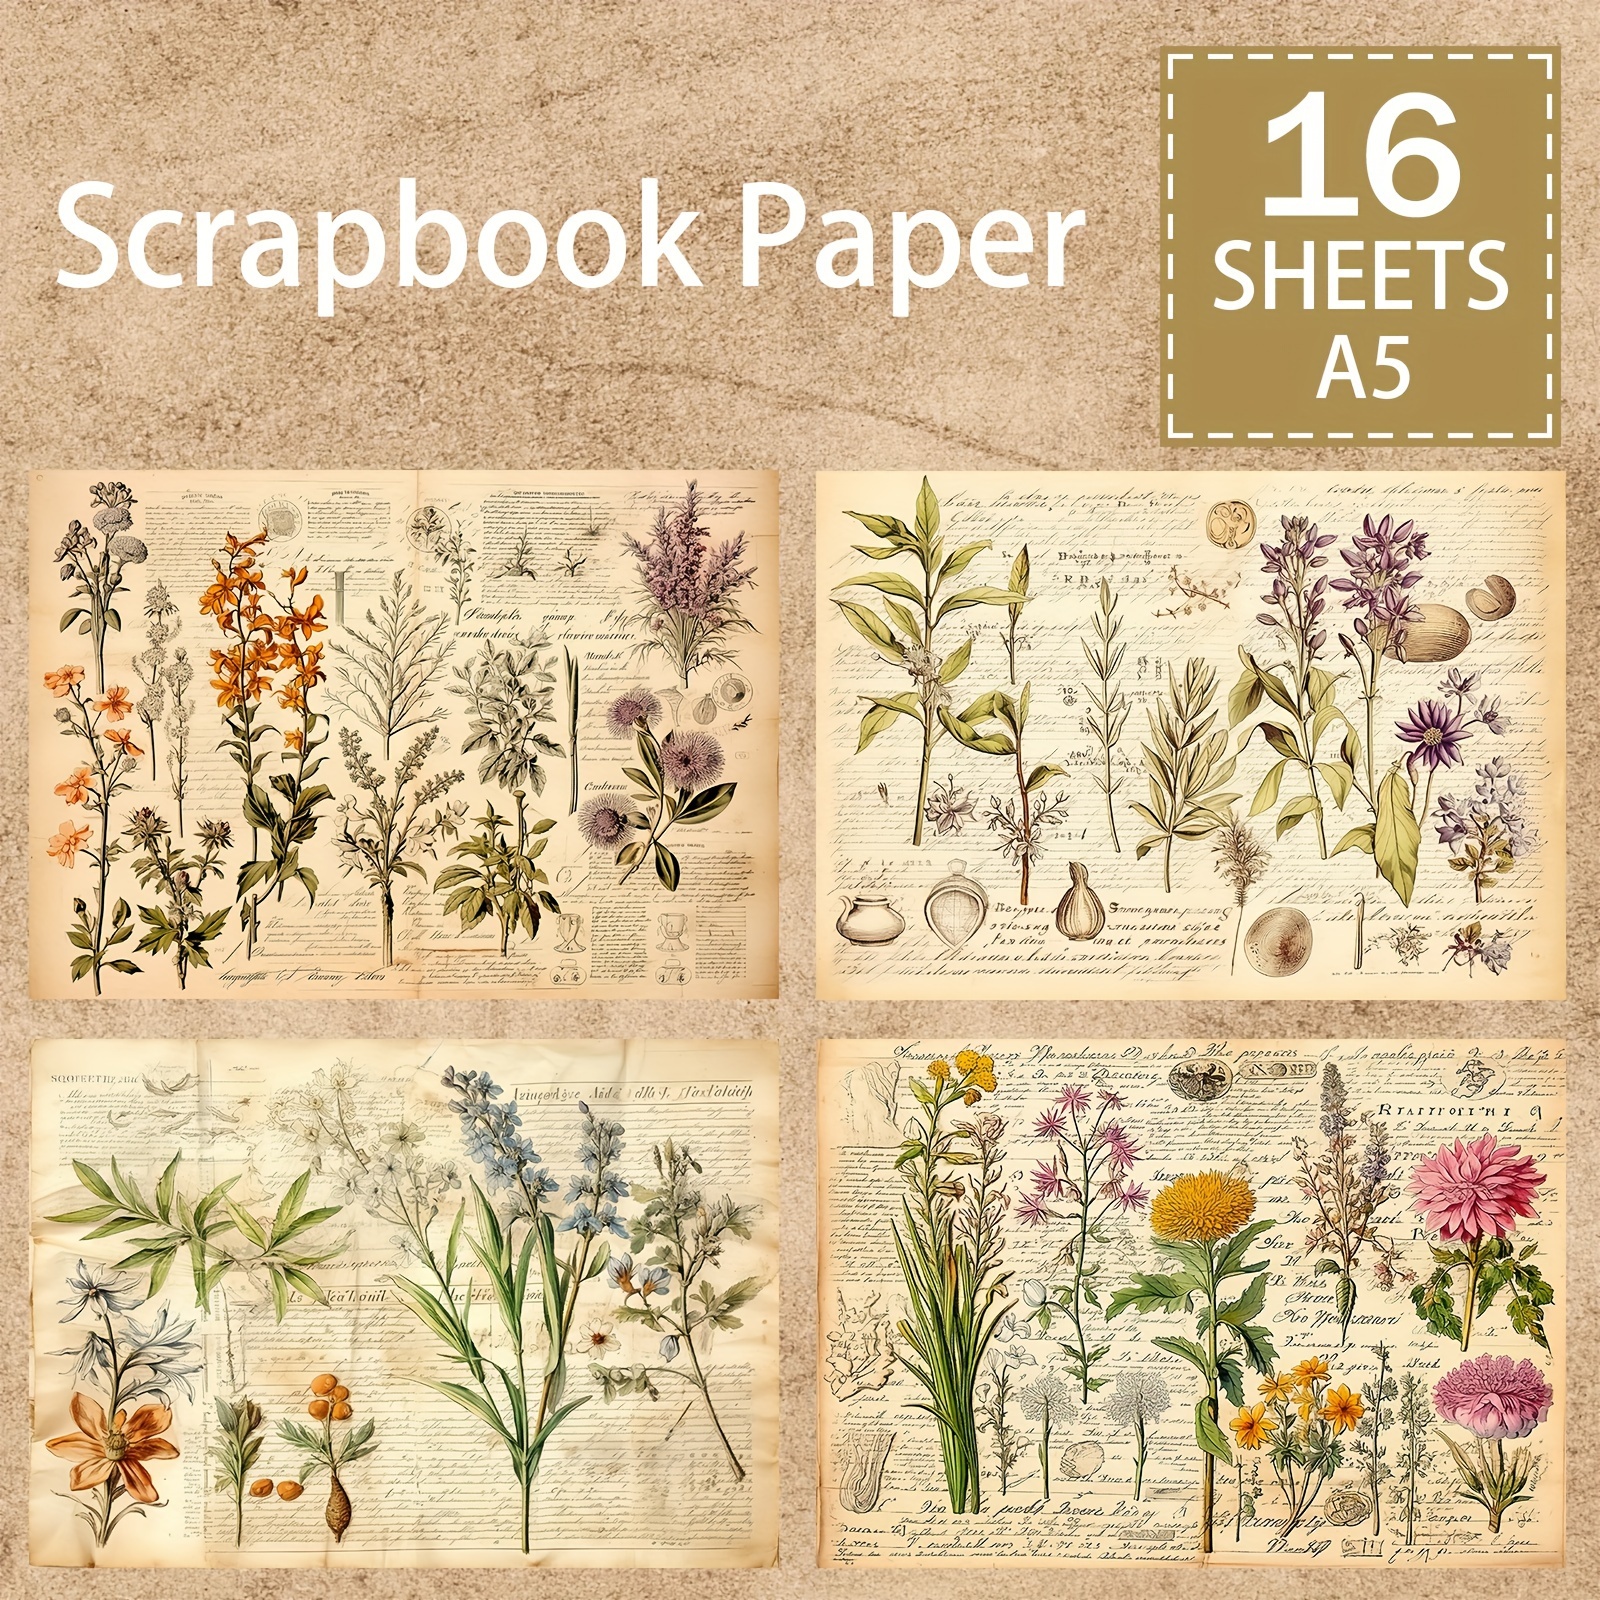 

Vintage Floral Scrapbook Paper Pack - 16 Sheets A5 Botanical Antique Style Craft Paper For Diy Junk Journaling, Greeting Cards, And Planner Embellishments, High-quality Bristol Paper Material